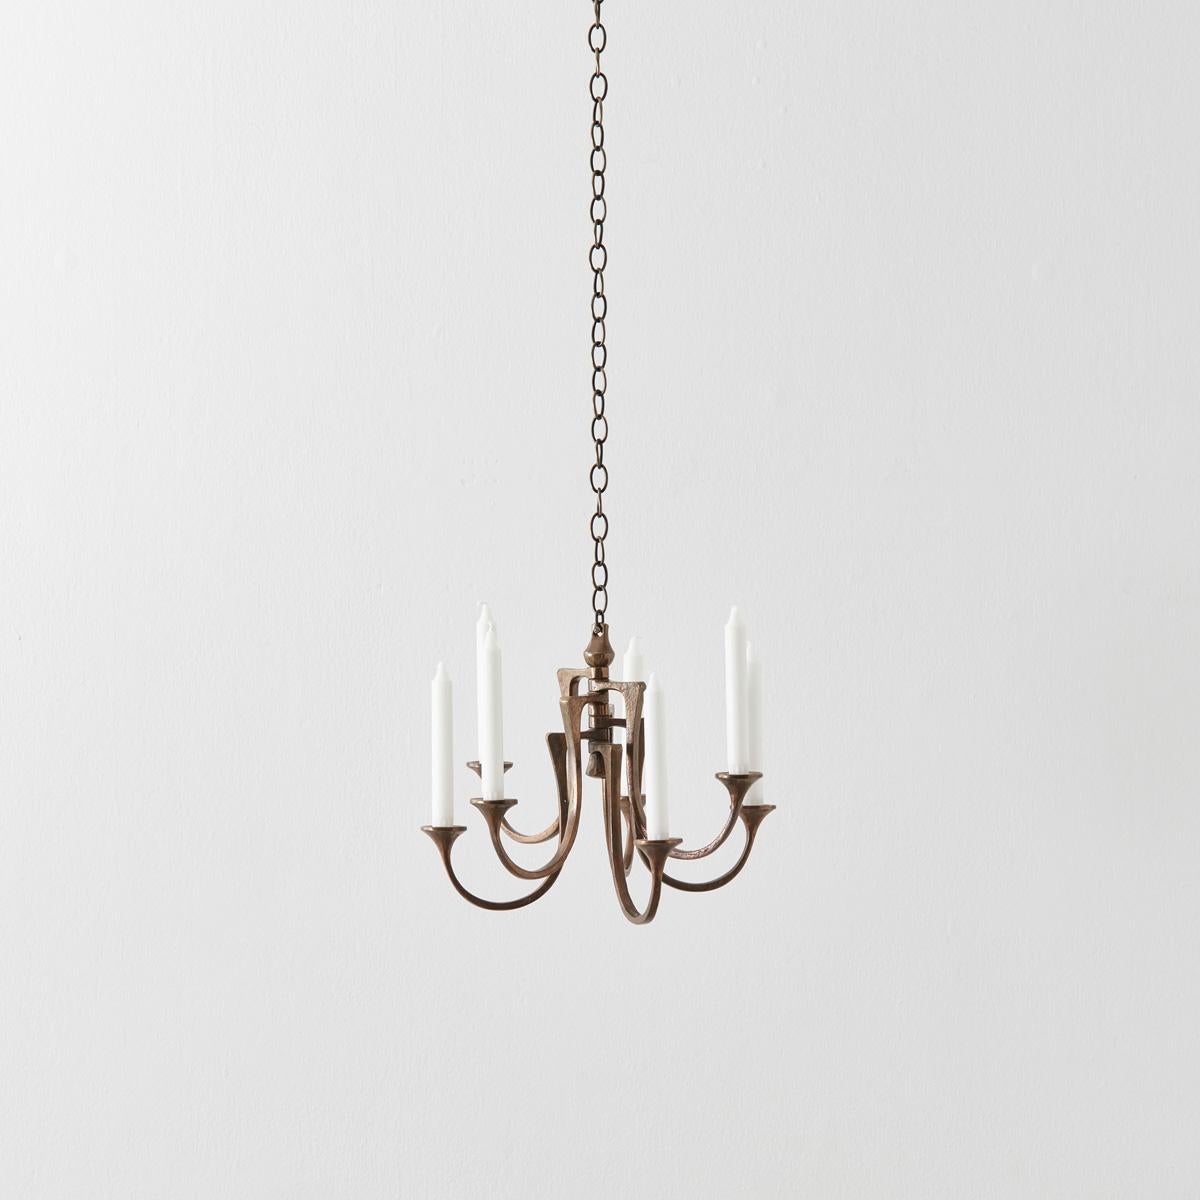 Made from solid bronze in a rich matt tone, this pendant chandelier has a subtle grandeur.
Its seven arms curl upwards, flaring at the ends into candlestick holders. Creating a series of striking chandeliers and candelabras as well as furniture,